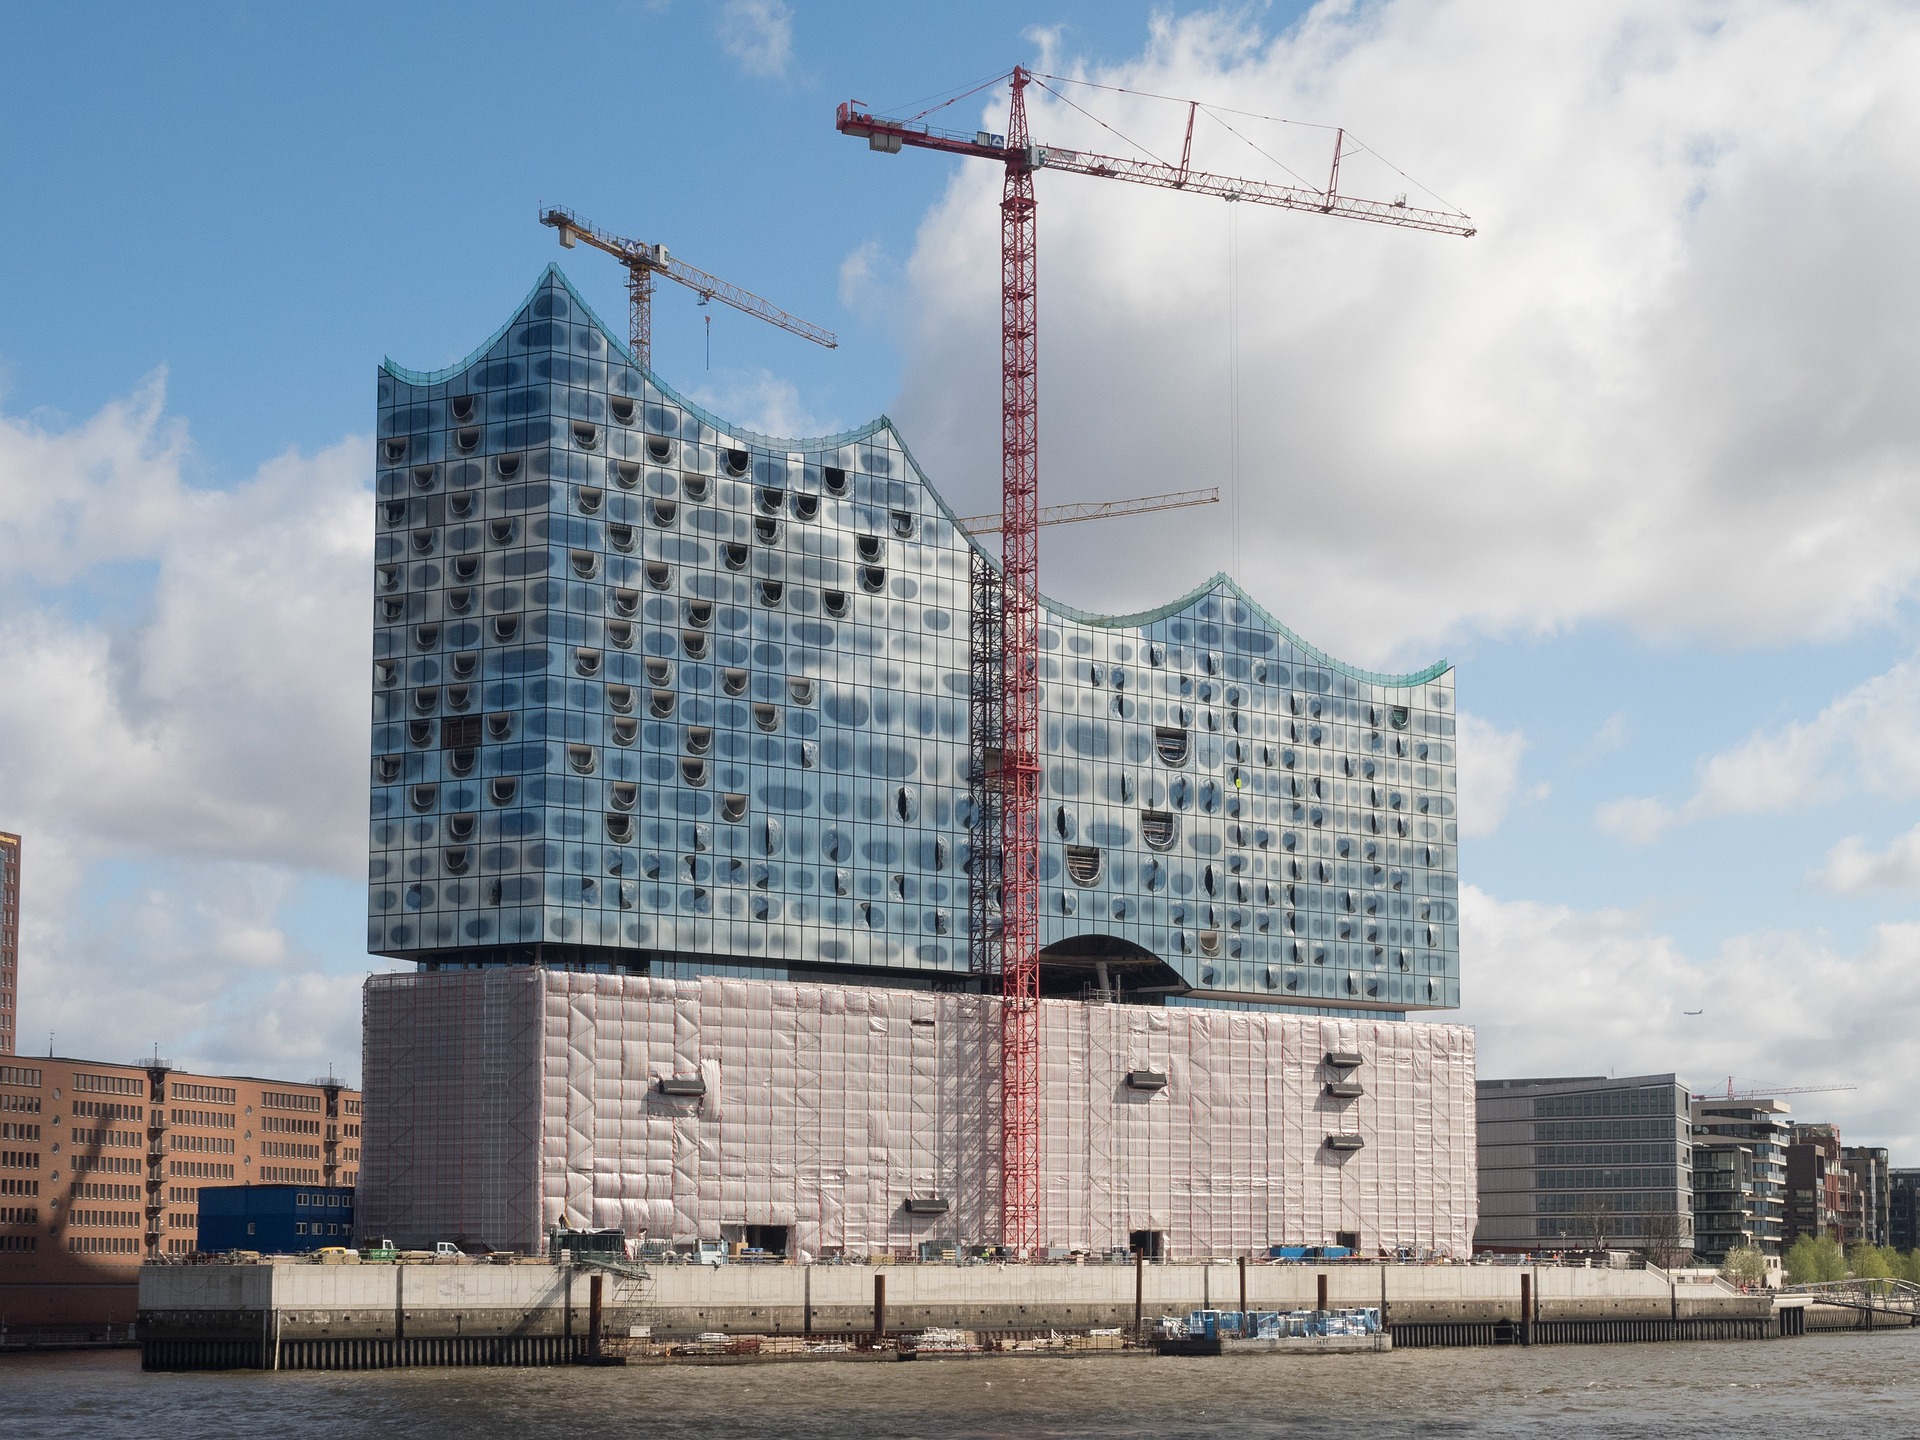 The construction of the Elbphilharmonie Hamburg took ten years, much longer than planned.